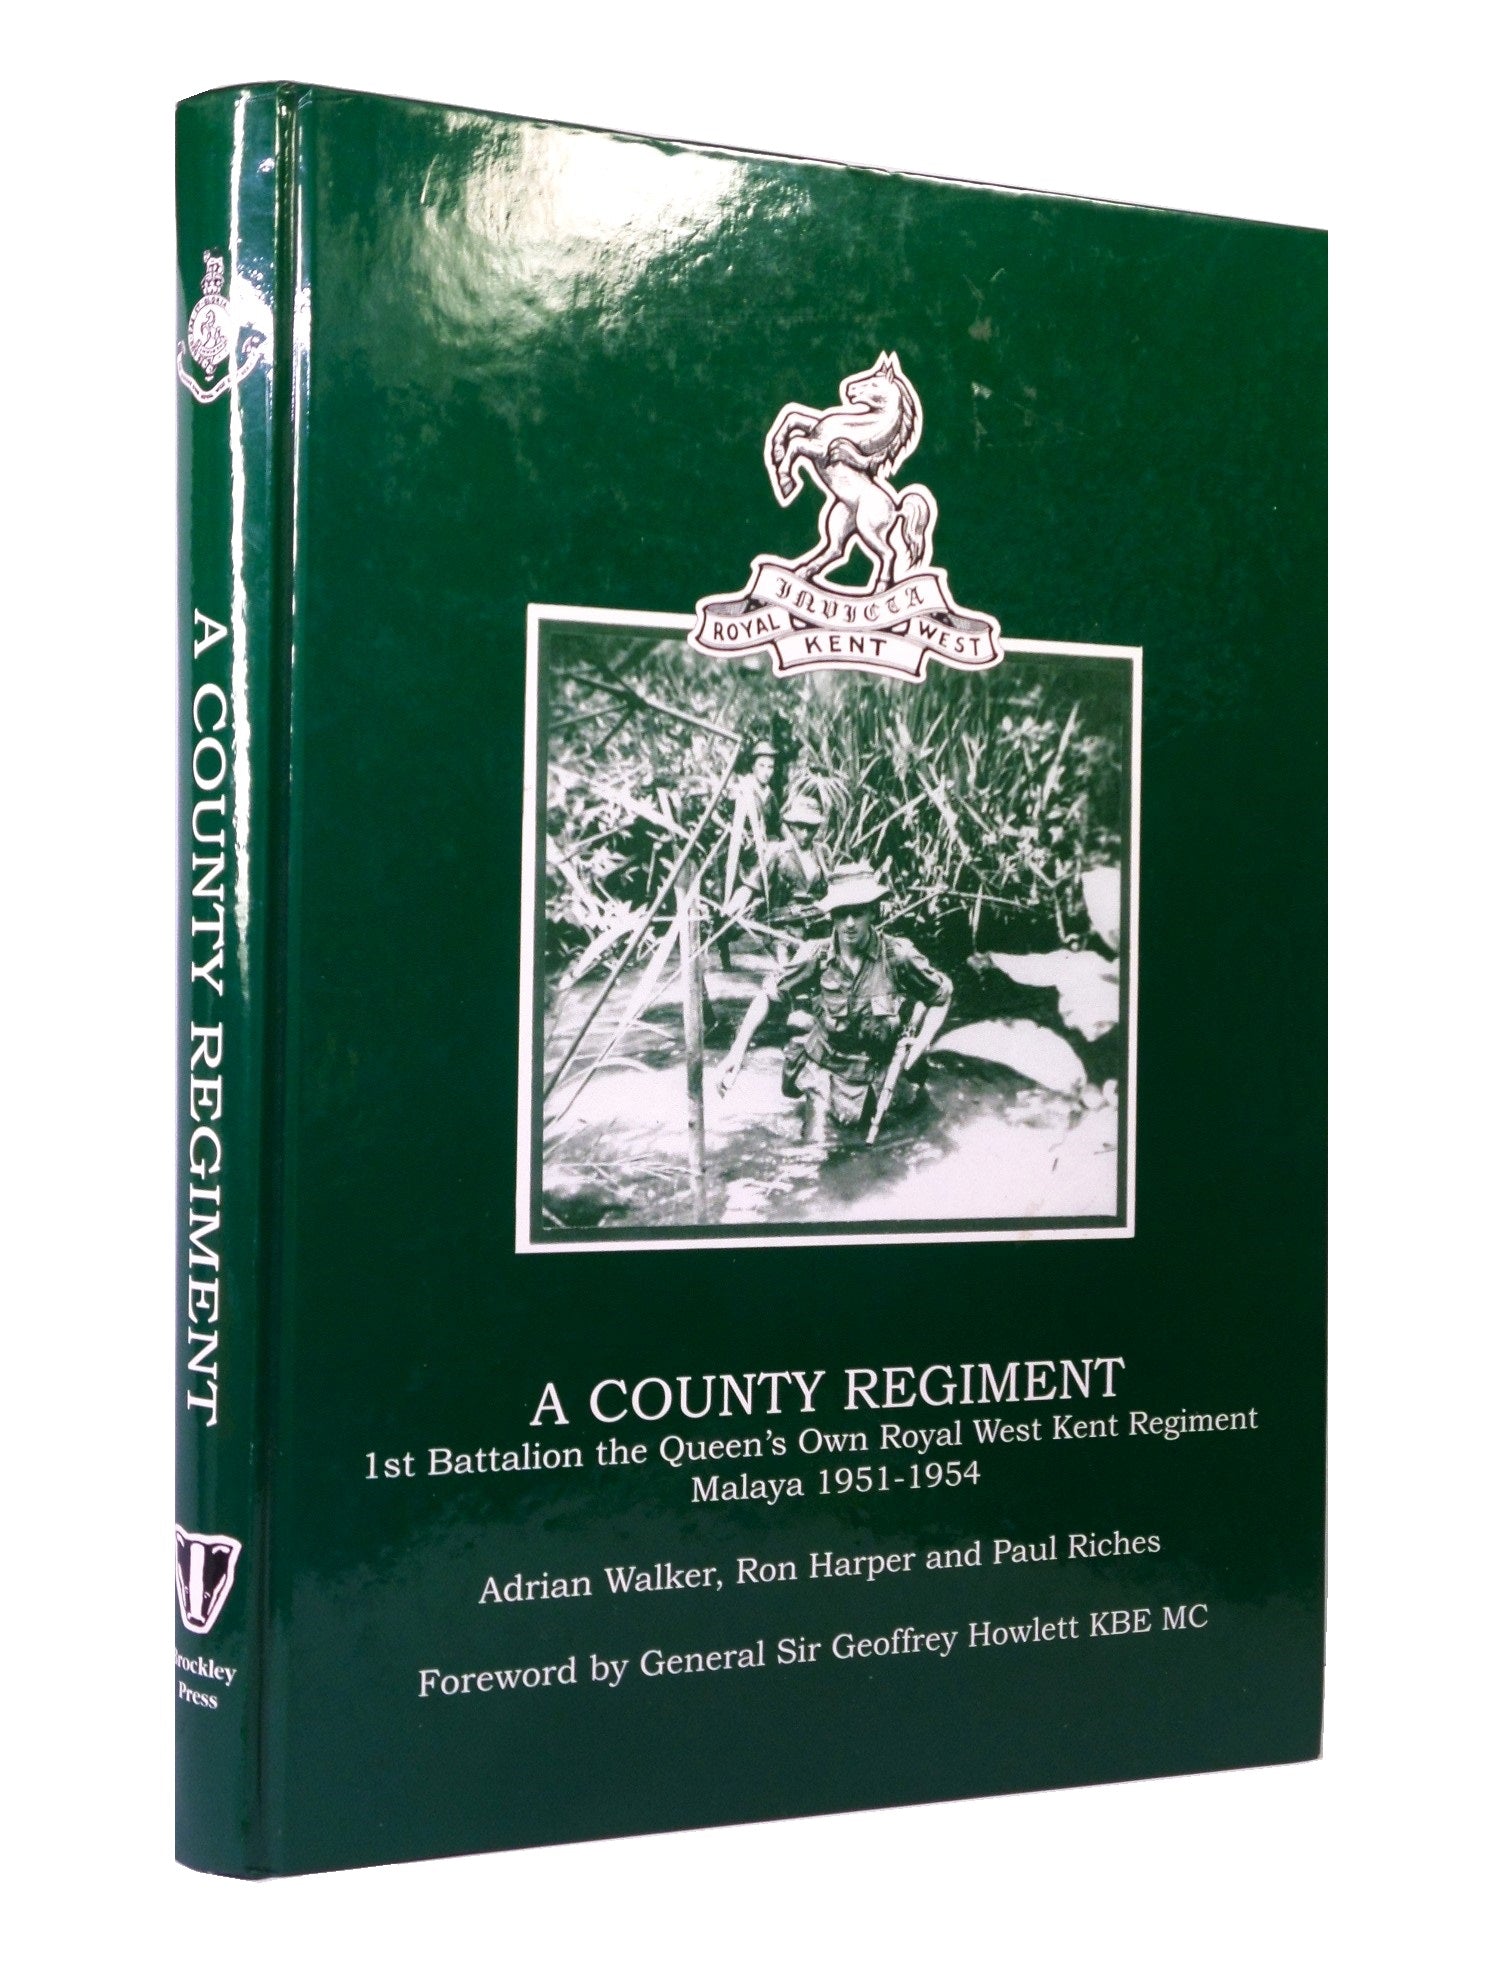 A COUNTY REGIMENT: 1ST BATTALION THE QUEEN'S OWN ROYAL WEST KENT REGIMENT MALAYA 1951-1954 FIRST EDITION HARDCOVER